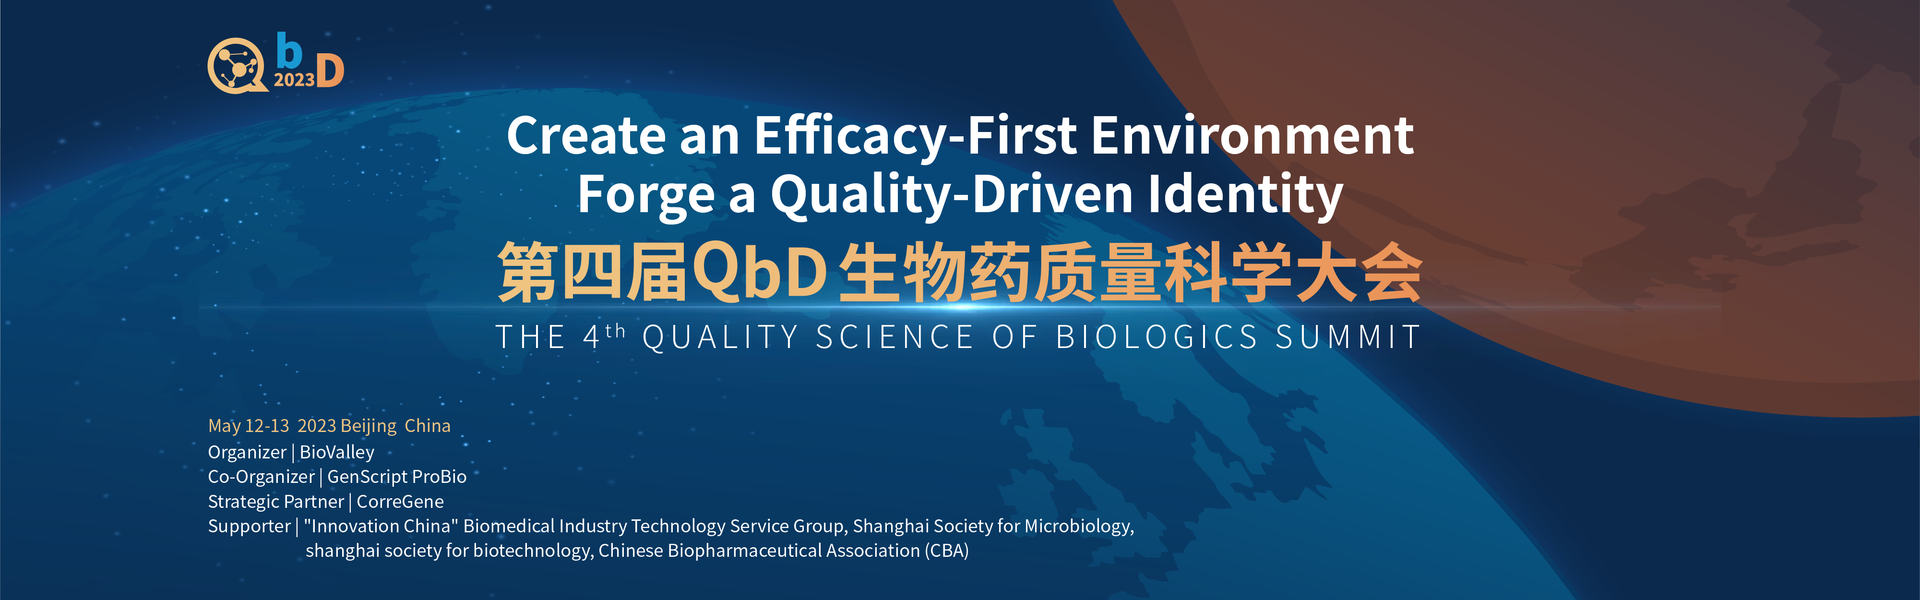 The  4th Quality   Science of Biologics Summit 2023